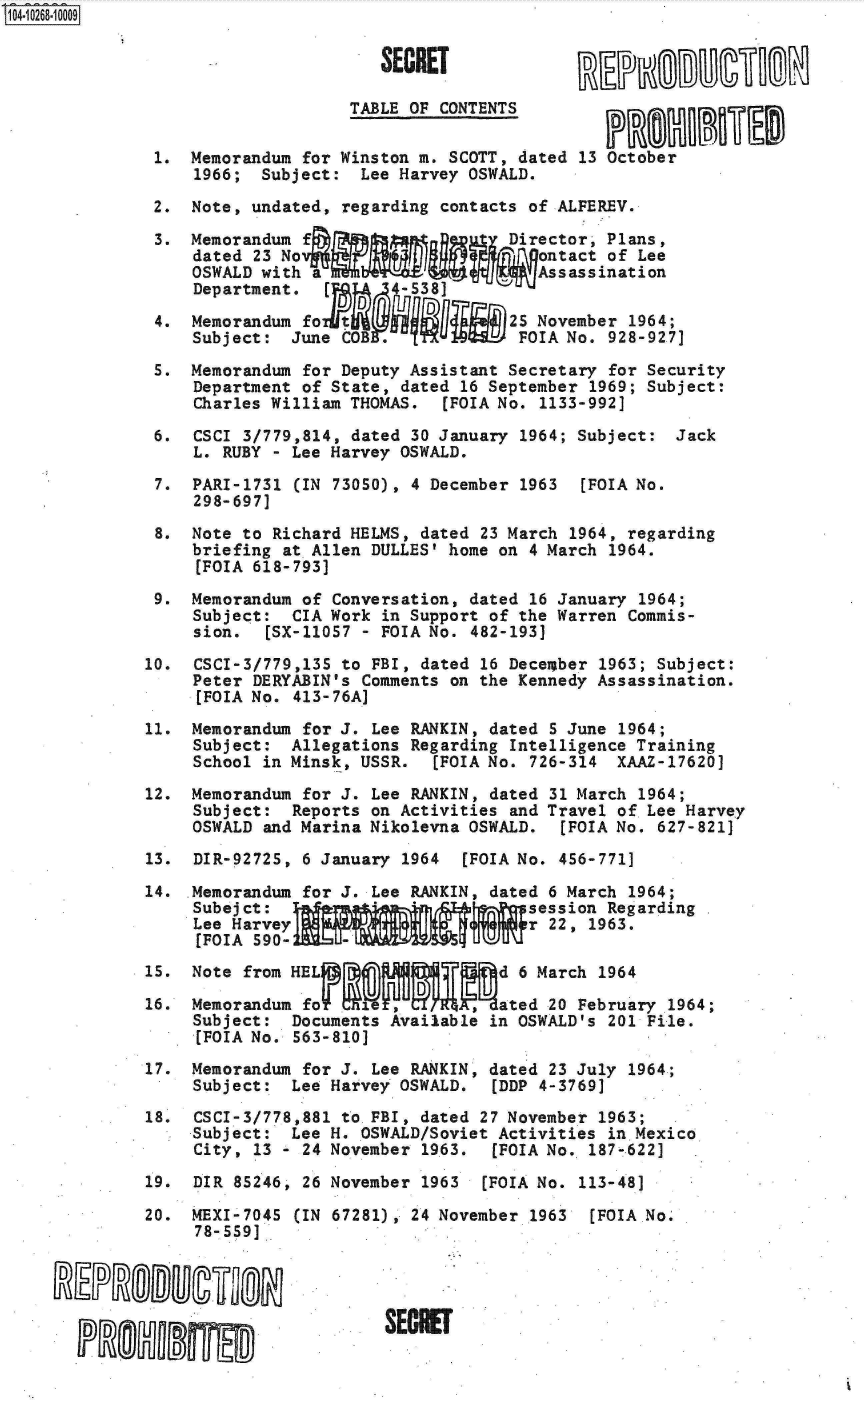 handle is hein.jfk/jfkarch01214 and id is 1 raw text is: 104-10268-10009


                                     SECRET

                                  TABLE OF CONTENTS


               1. Memorandum for Winston m. SCOTT, dated 13 October
                   1966; Subject:  Lee Harvey OSWALD.

               2. Note, undated, regarding contacts of ALFEREV.

               3. Memorandum fD                             Plans,
                   dated :23 No                 ~ontact of Lee
                   OSWALD with ara                   Assassination
                   Department.        4-538]

               4. Memorandum f                       November 1964;
                  Subject:  June COB .             FIA  No, 928-92.7]

               5. Memorandum for Deputy Assistant Secretary for Security
                   Department of State, dated 16 September 1969; Subject:
                   Charles William THOMAS.  [FOIA No. 1133-992]

               6.  CSCI 3/779,814, dated 30 January 1964; Subject: Jack
                   L. RUBY - Lee Harvey OSWALD.

               7, PARI-1731  (IN 73050) , 4 December 1963 [FOIA No.
                   298- 697]

               8. Note to Richard HELMS, dated 23 March 1964, regarding
                  briefing at.Allen DULLES' home on 4 March 1964.
                  [FOIA  618-793]

               9. Memorandum of Conversation, dated 16 January 1964;
                   Subject: CIA Work in Support of the Warren Commis-
                   sion.  [SX-110S7 - FOIA No. 482-193]

              10.  CSCI-3/779,13S to FBI, dated 16 Decemtber 1963; Subject:
                   Peter DERYABIN's Comments on the Kennedy Assassination.
                      [OANo. 413-76A]

              11. Memorandum for J. Lee RANKIN, dated 5 June 1964;
                   Subject: Allegations Regarding Intelligence Training
                   School in Minsk, USSR.  [FOIA No, 726-314 XAAZ-17620]

              12. Memorandum for J. Lee RANKIN, dated 31 March 1964;
                   Subject: Reports on Activities and Travel of Lee Harvey
                   OSWALD and Marina Nikolevna OSWALD. [FOIA No, 627-821]

              13.  DIR-92725, 6 January 1964 [FOIA No. 456-771]

              14. Memorandum for J. Lee RANKIN, dated 6 March 1964;
                   Subej ct:                        session Regarding
                   Lee Harvey                       r 22, 1963.
                   [FOIA 590 - EqL~-L2)5I w ~      u
              15. Note  from HEL
              16.  M           o                     M     1964
                        16.   emoandu  fo,   gnted20 February 1964;
                   Subject:. Documents Available in OSWALD's 201 File,
                   .[FOIA No, 63-810]

              17. Memorandum for J. Lee RANKIN, dated 23 July 1964;
                   Subject: Lee Harvey OSWALD.  [DDP 4-3769]

              18.  CSCI-3/778,881 to.FBI, dated 27 November 1963;
                  Subject:  Lee H. OSWALD/Soviet Activities in Mexico.
                  City,  13 - 24 November 19.63. [FOIA No, 187-622]

              19.  DIR 85246, 26 November 1963 (FOIA No. 113-48]

              20. MEXI-7045  (IN 67281).9 24 November 1963 [FOIA No.
                   78-1559]


       RELHIIDo16.
                    17.N


